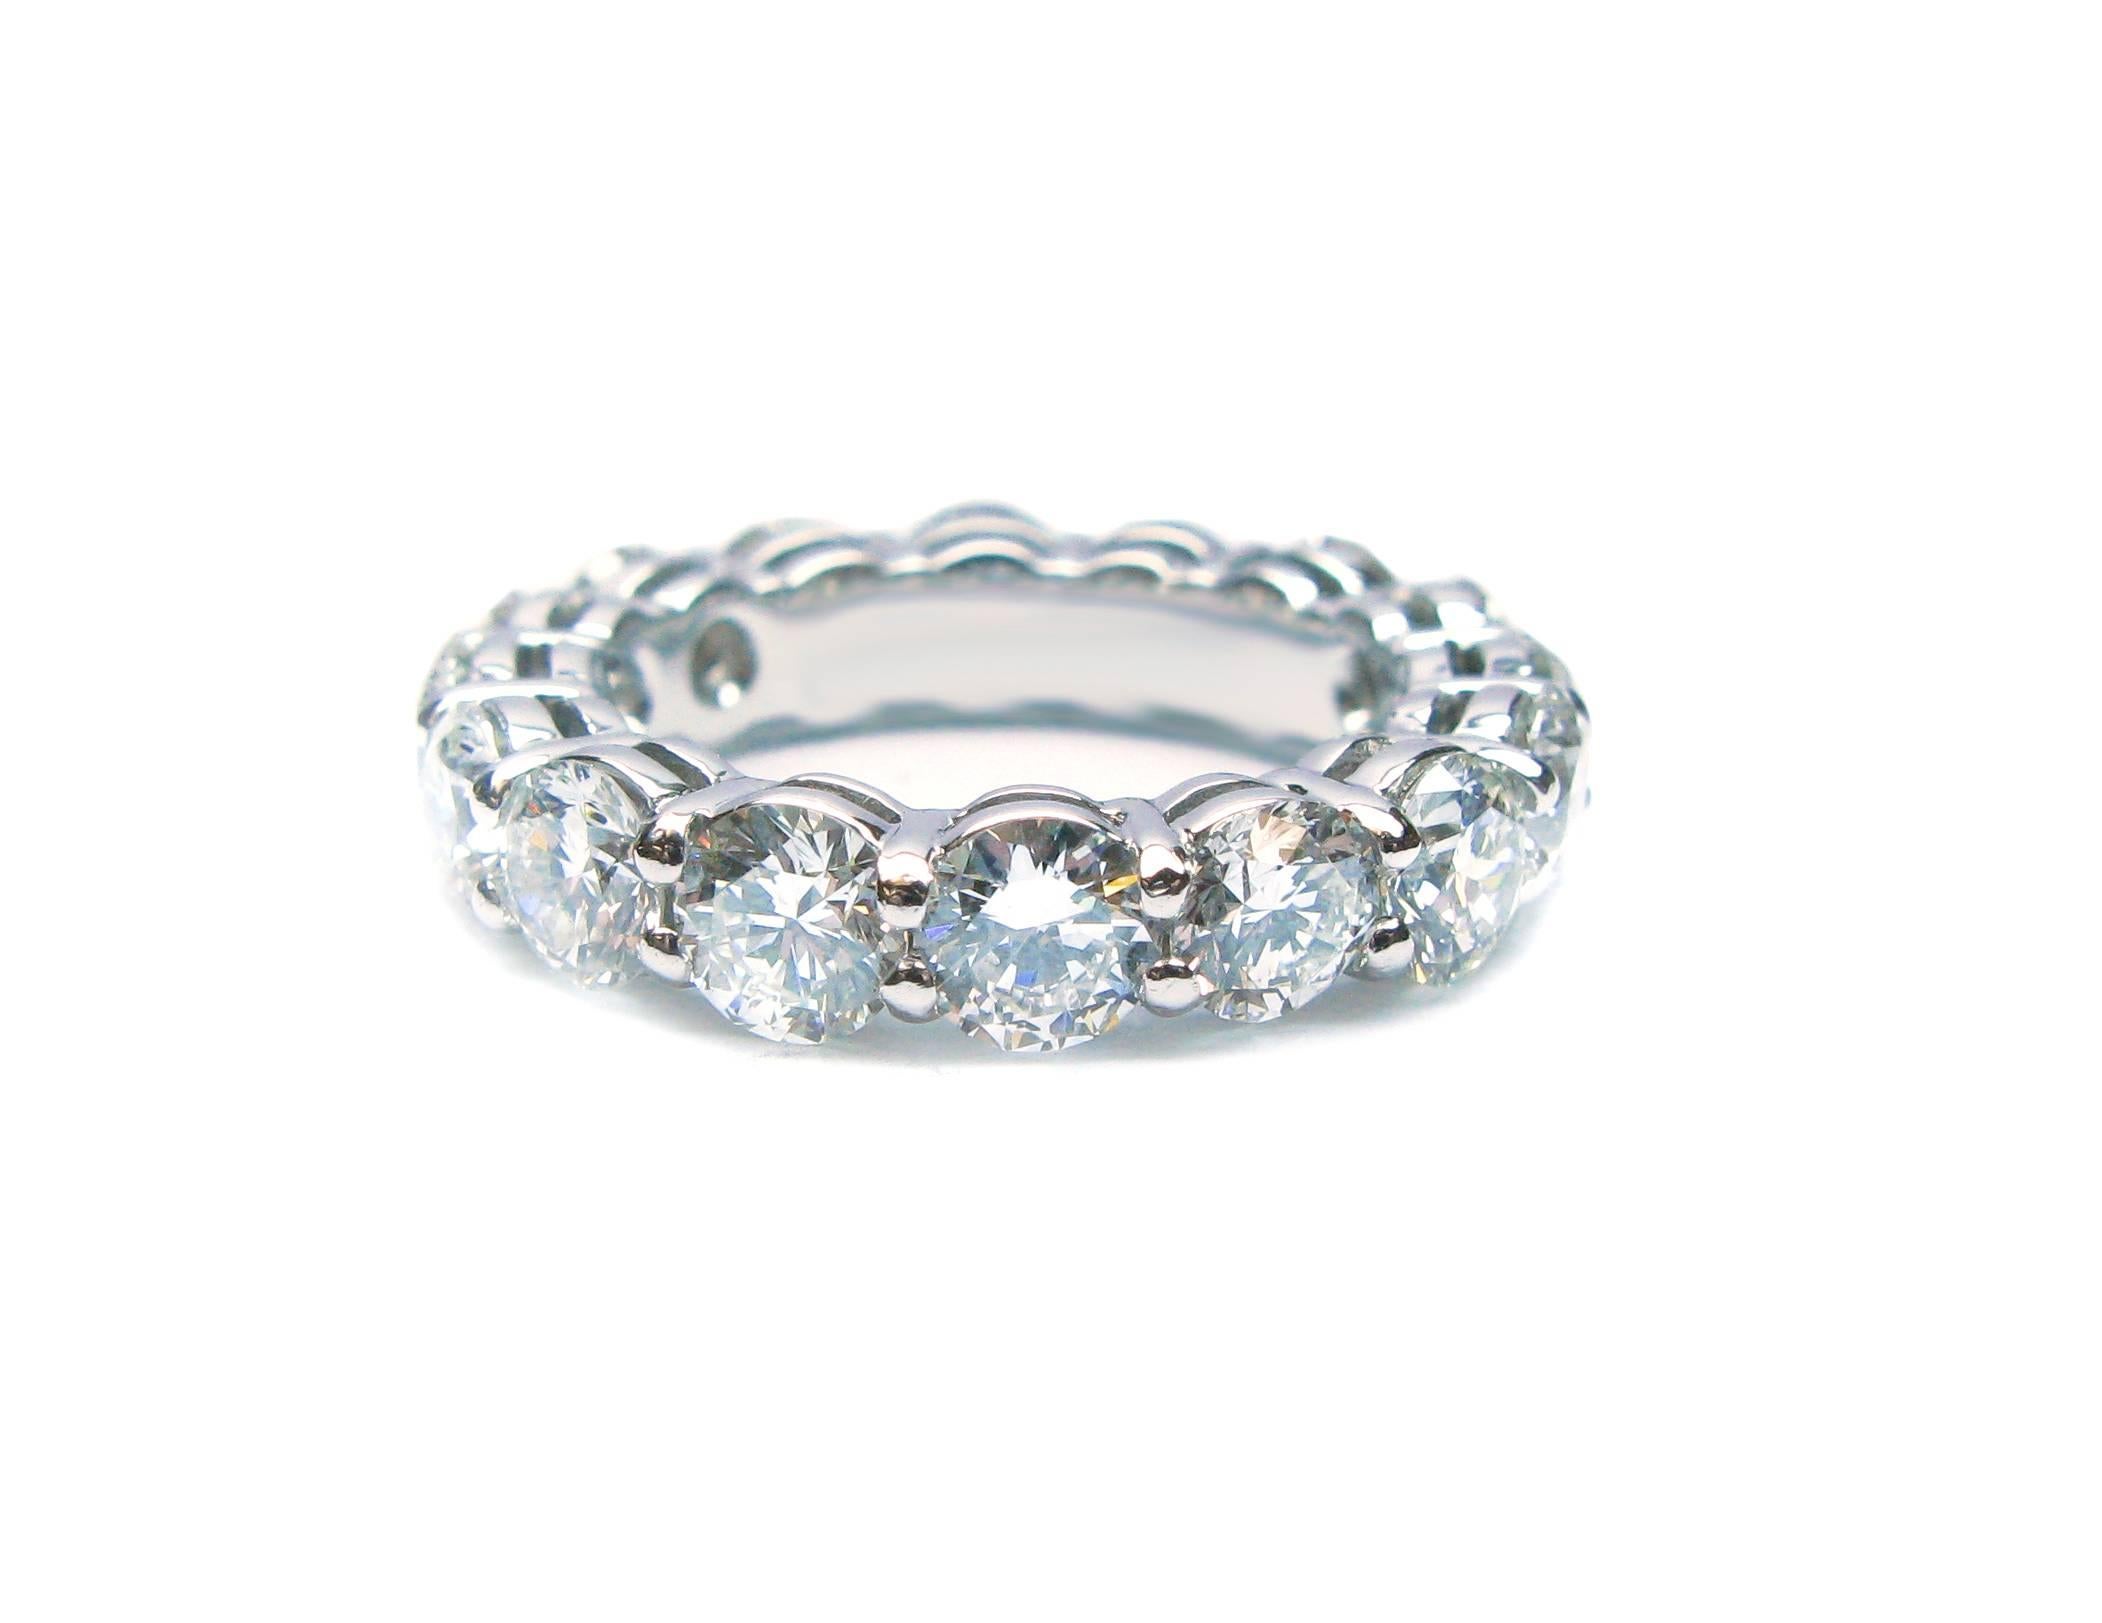 This stunning Graff signed shared prong platinum eternity band features 16 sparkling F/G color, VS clarity, round brilliant diamonds weighing 4.80ctw. A beautiful band to symbolize your love for one another!